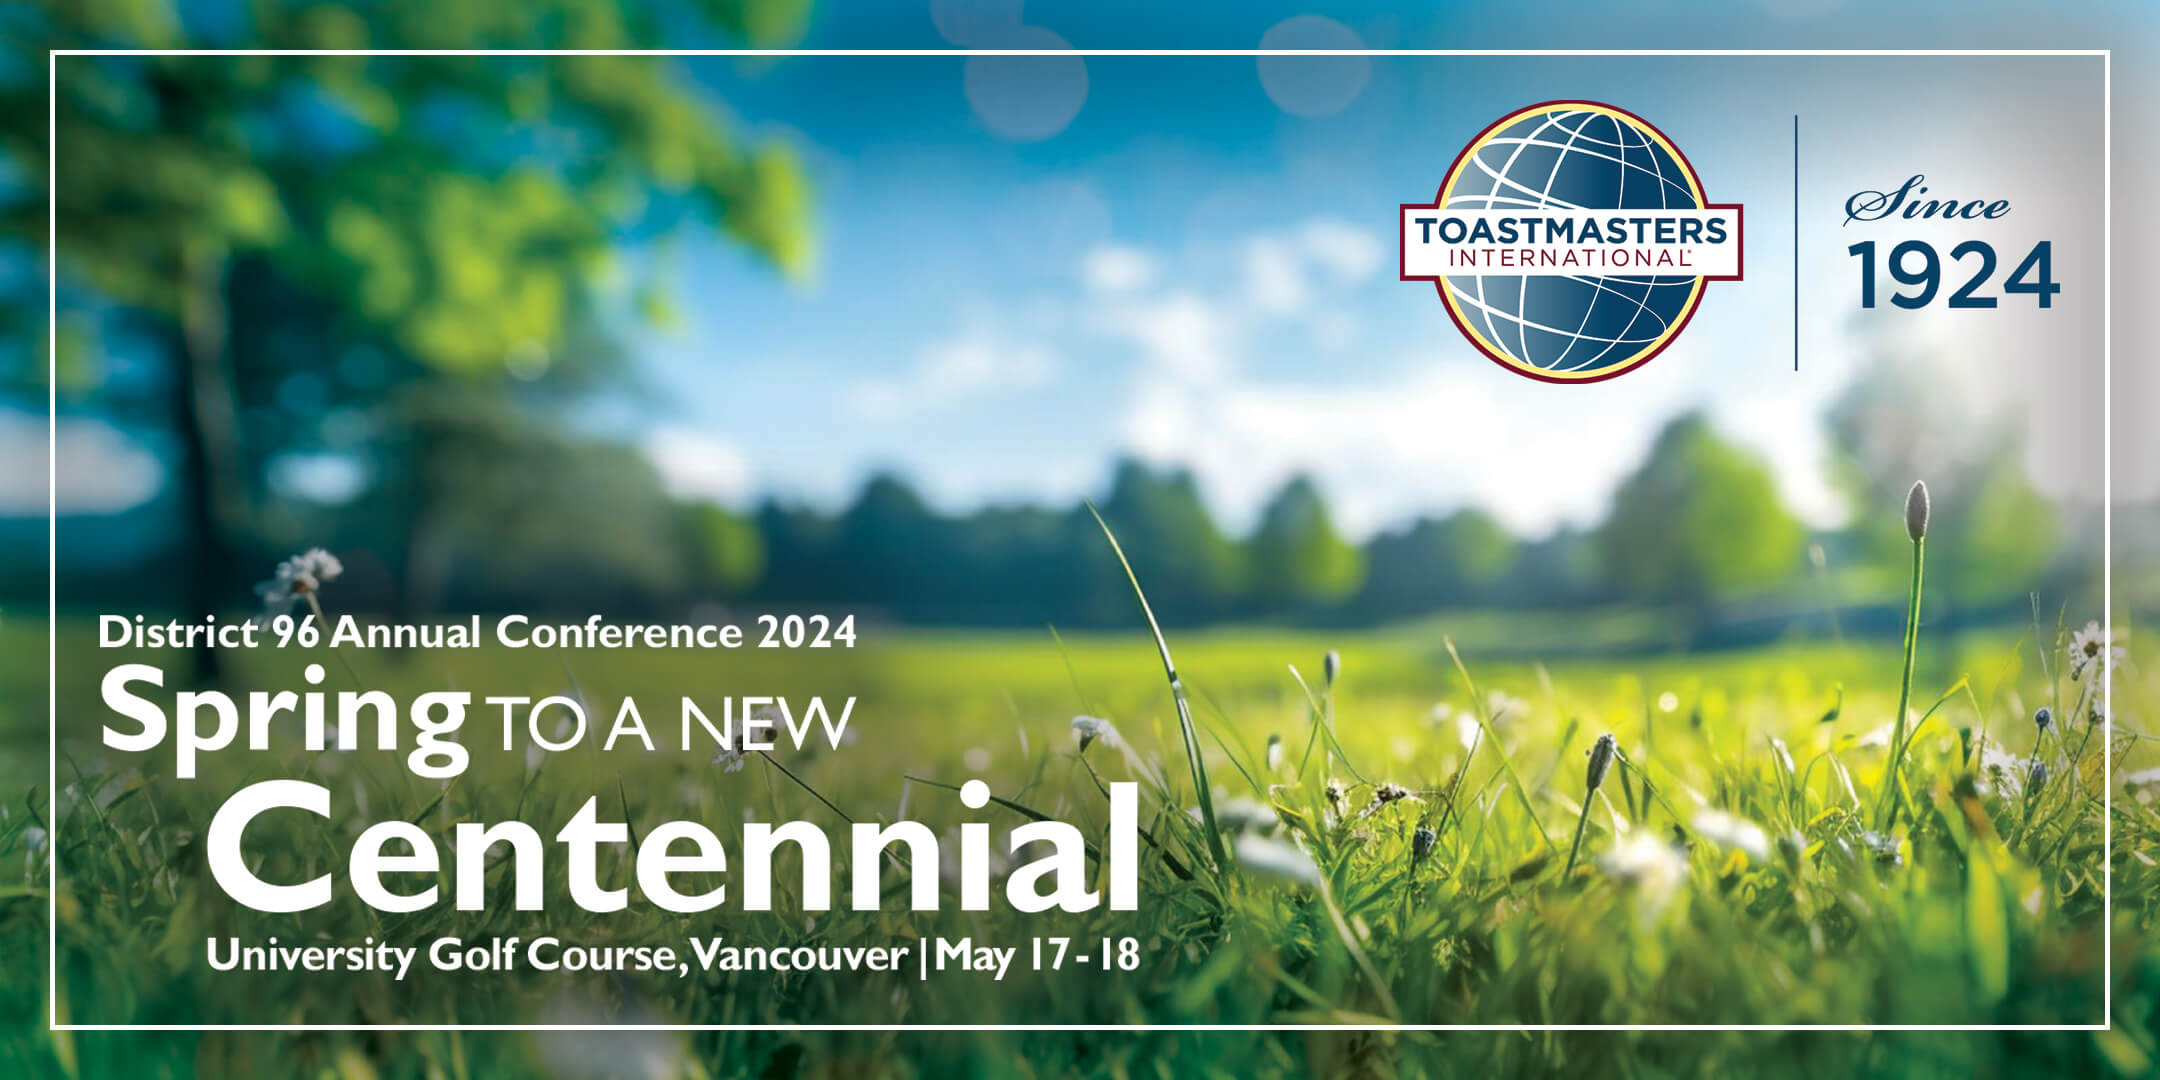 'Spring in a new Centennial' conference theme logo over a blurred image of a field in the spring